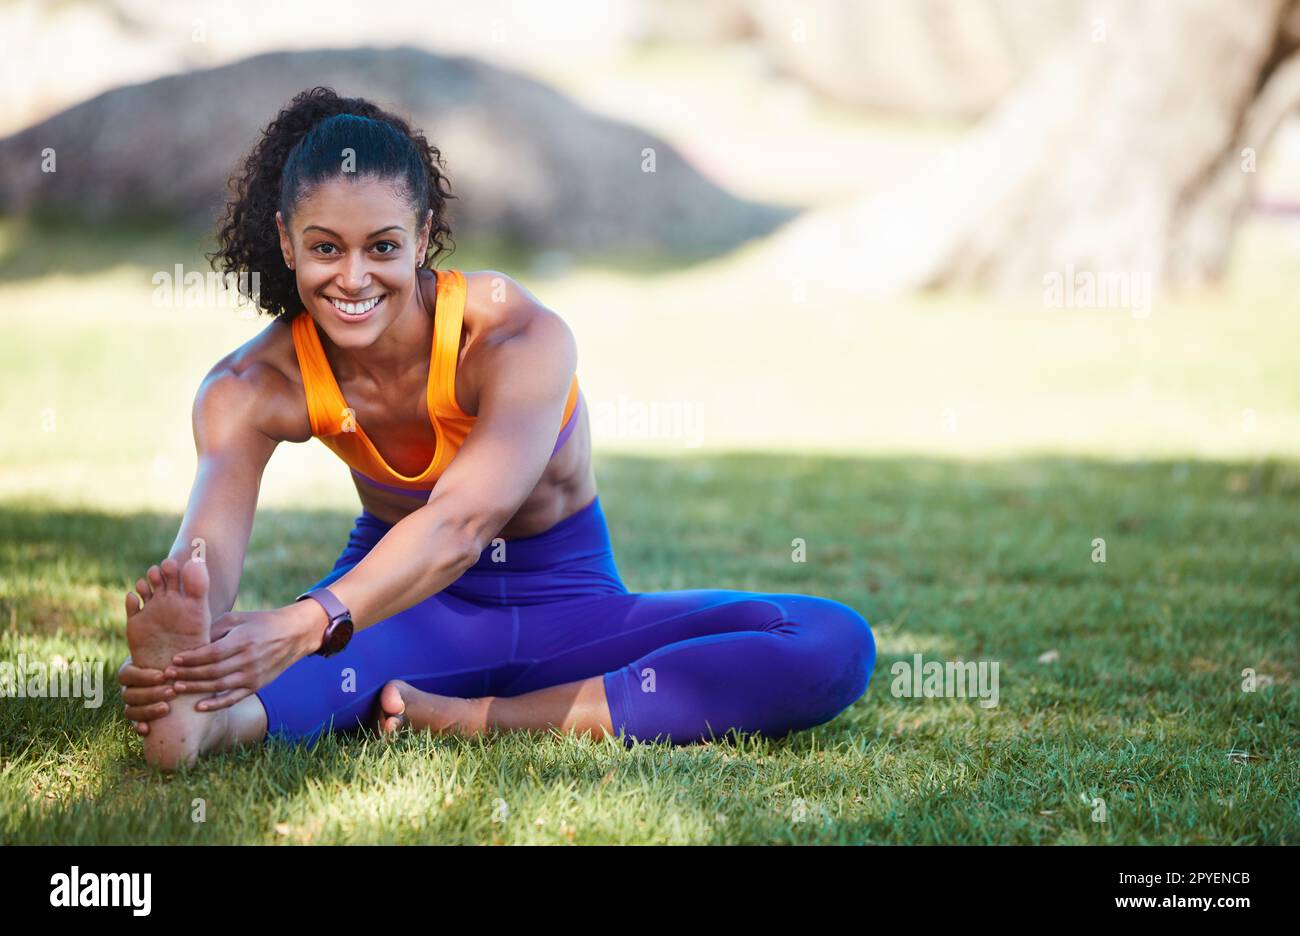 Exercise puts me in a good mood. a sporty young woman stretching before her workout. Stock Photo